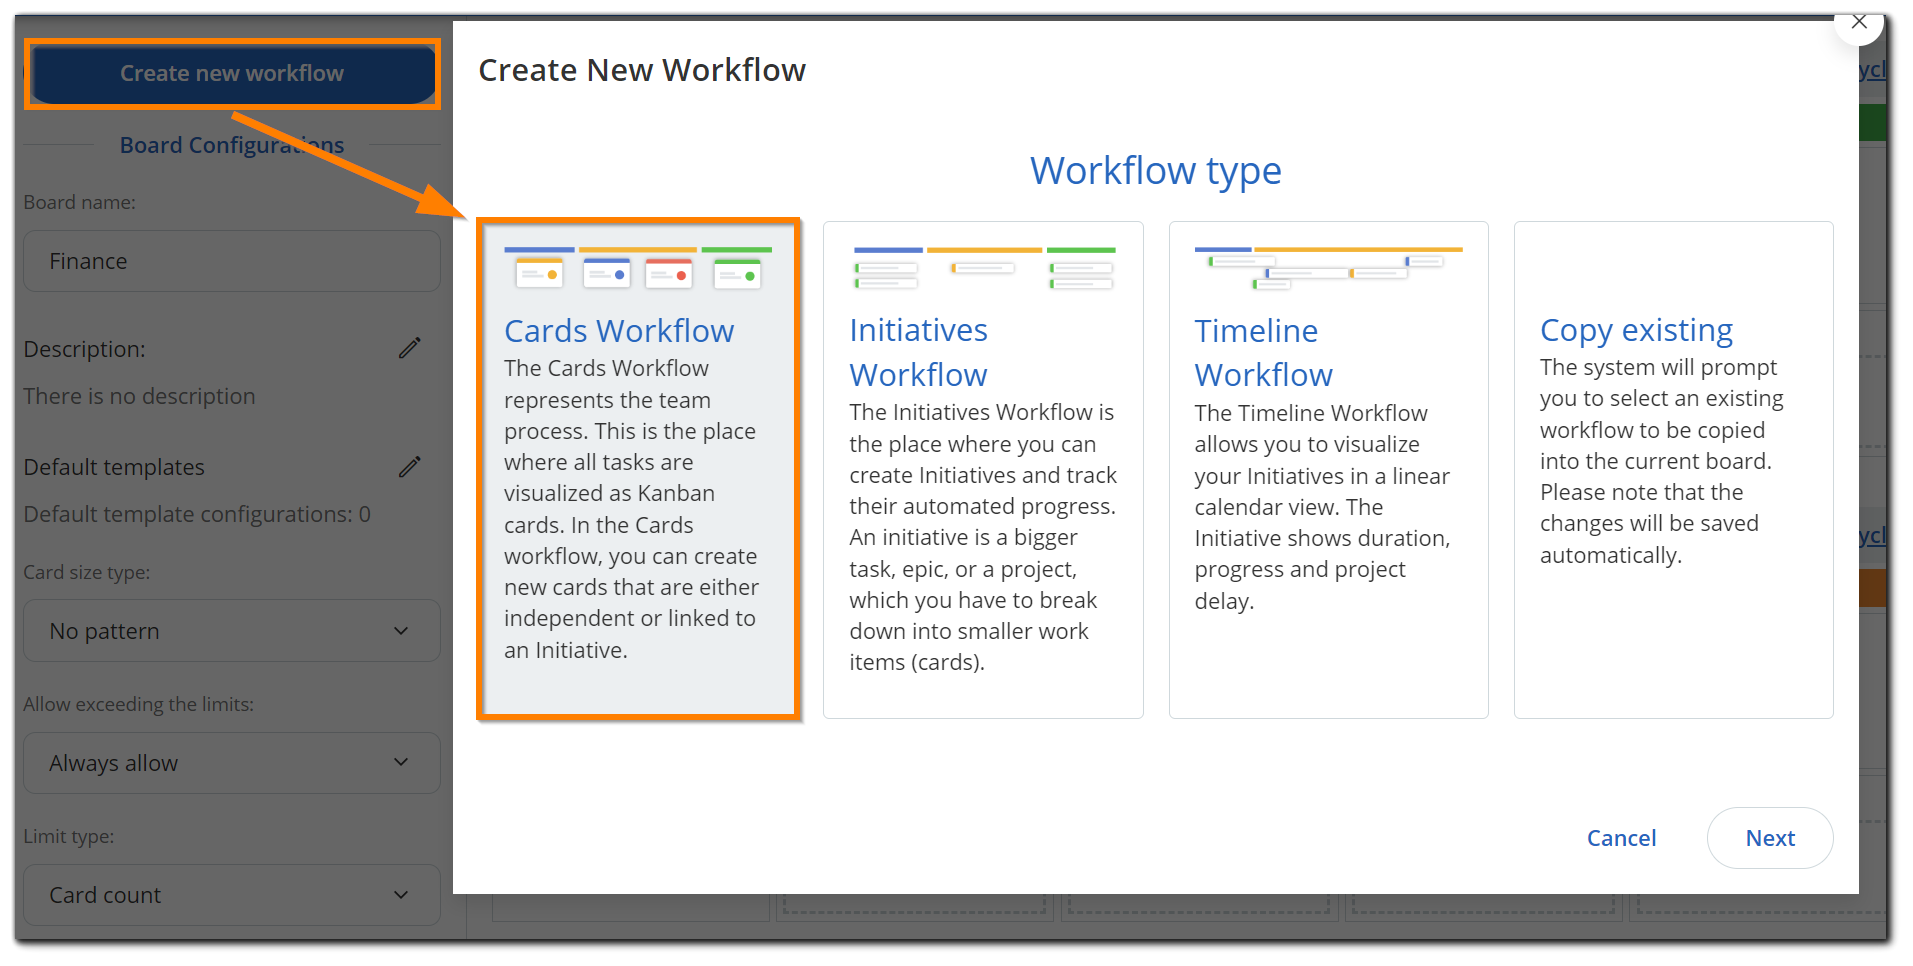 cards-workflow-new-workflow.png